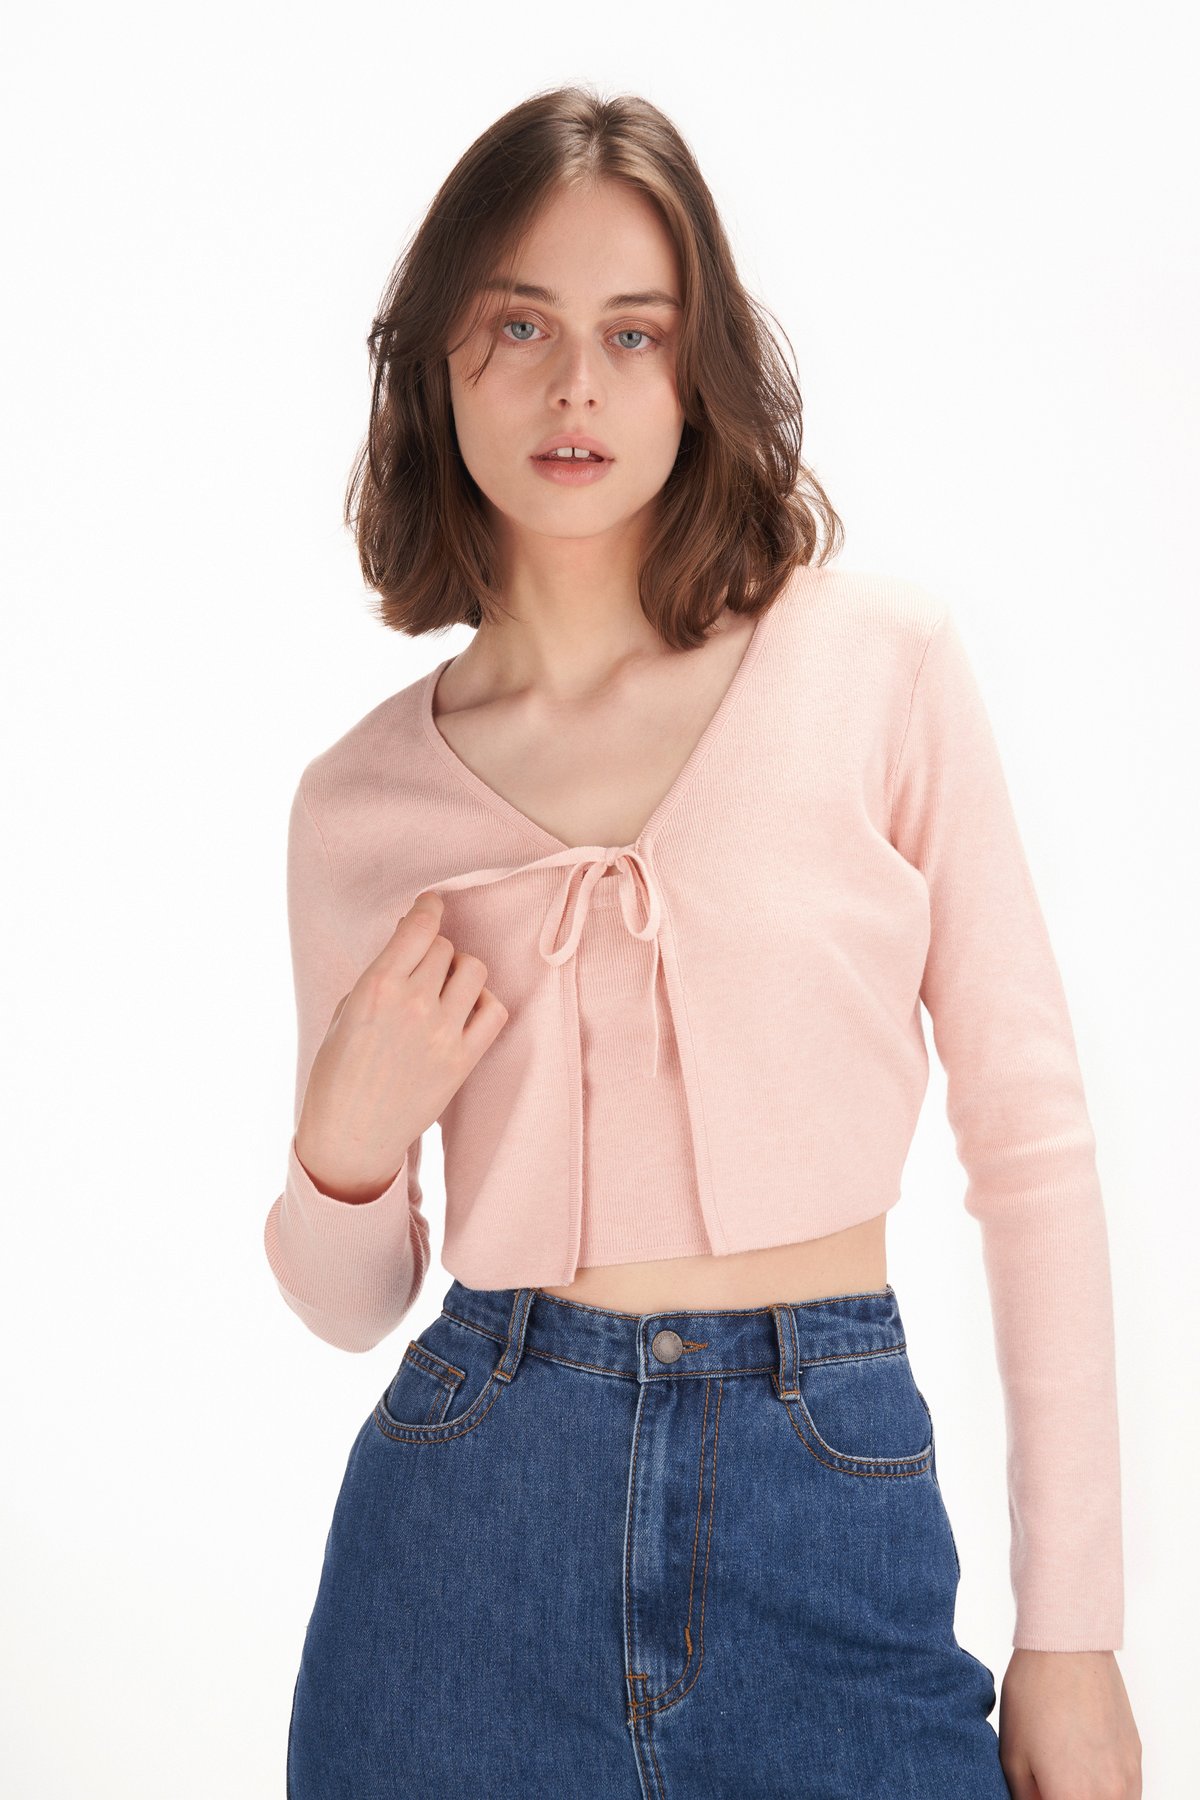 https://dum76bmz7do3s.cloudfront.net/sites/files/theclosetlover/images/products/202309/1200xAUTO/celine_knit_crop_cardigan_in_pink3_0.jpg